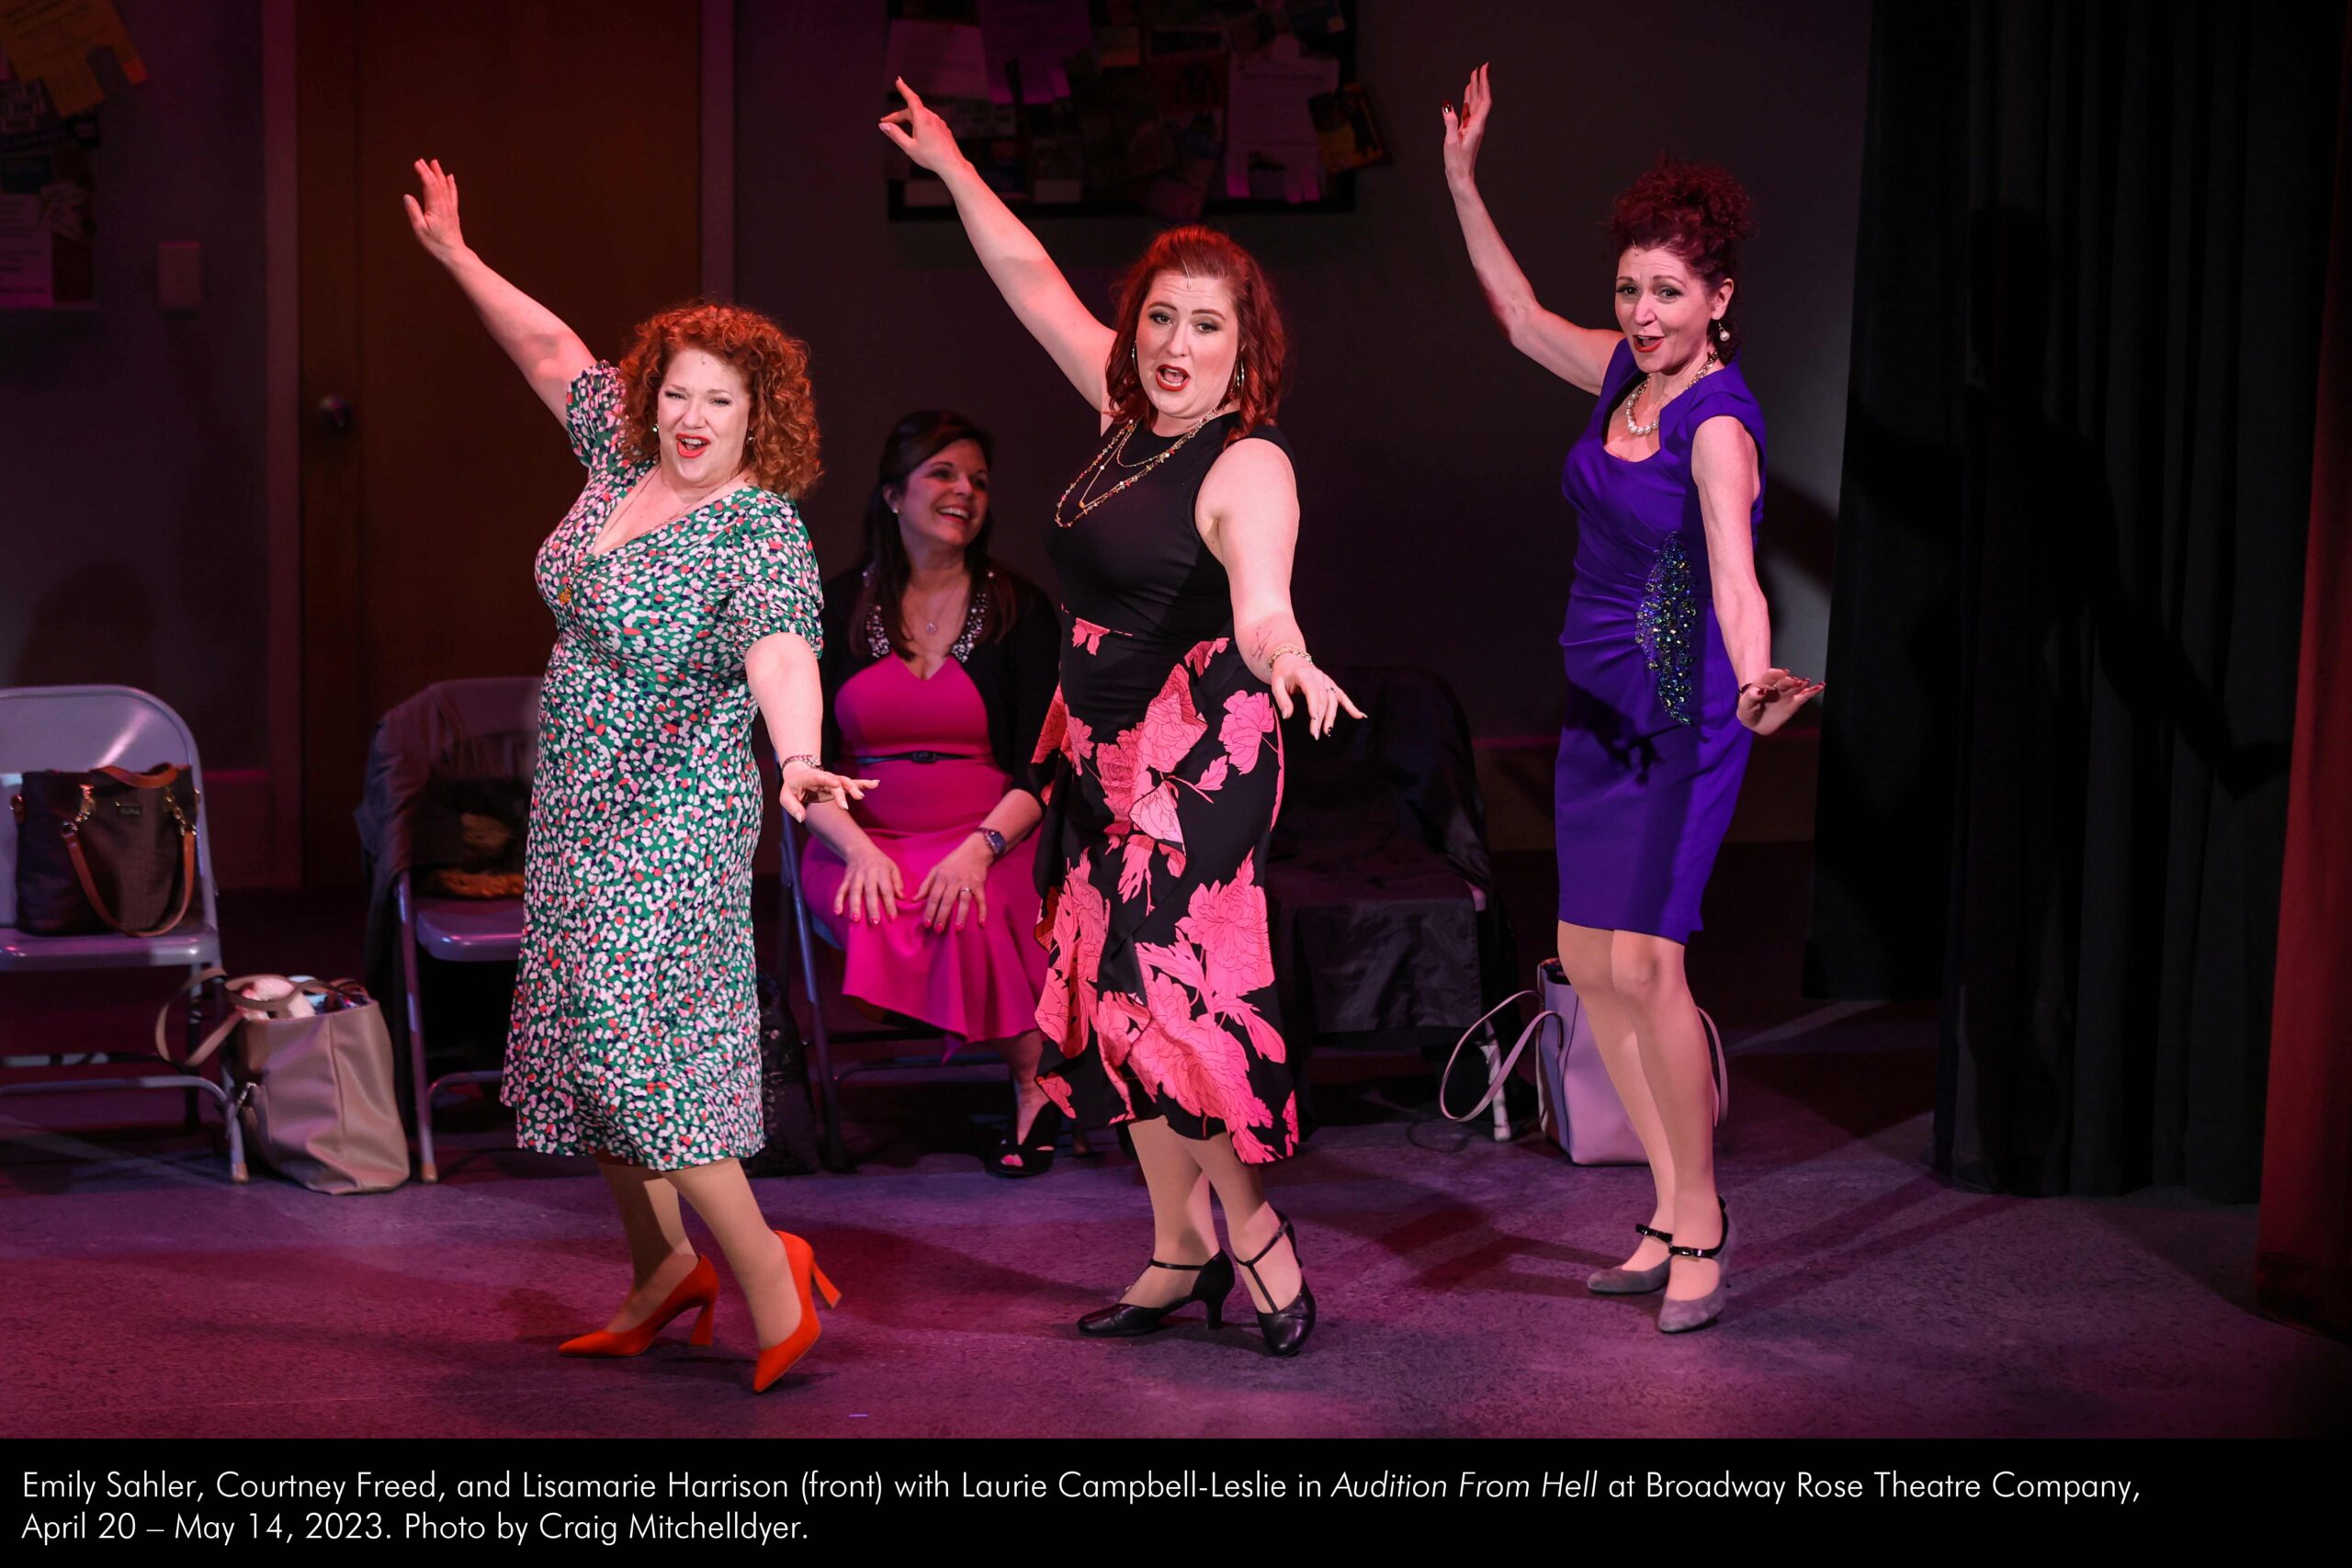 Emily Sahler, Courtney Freed, and Lisamarie Harrison (front) with Laurie Campbell-Leslie in Audition From Hell at Broadway Rose Theatre Company. April 20 through May 14, 2023. Photo by Craig Mitchelldyer